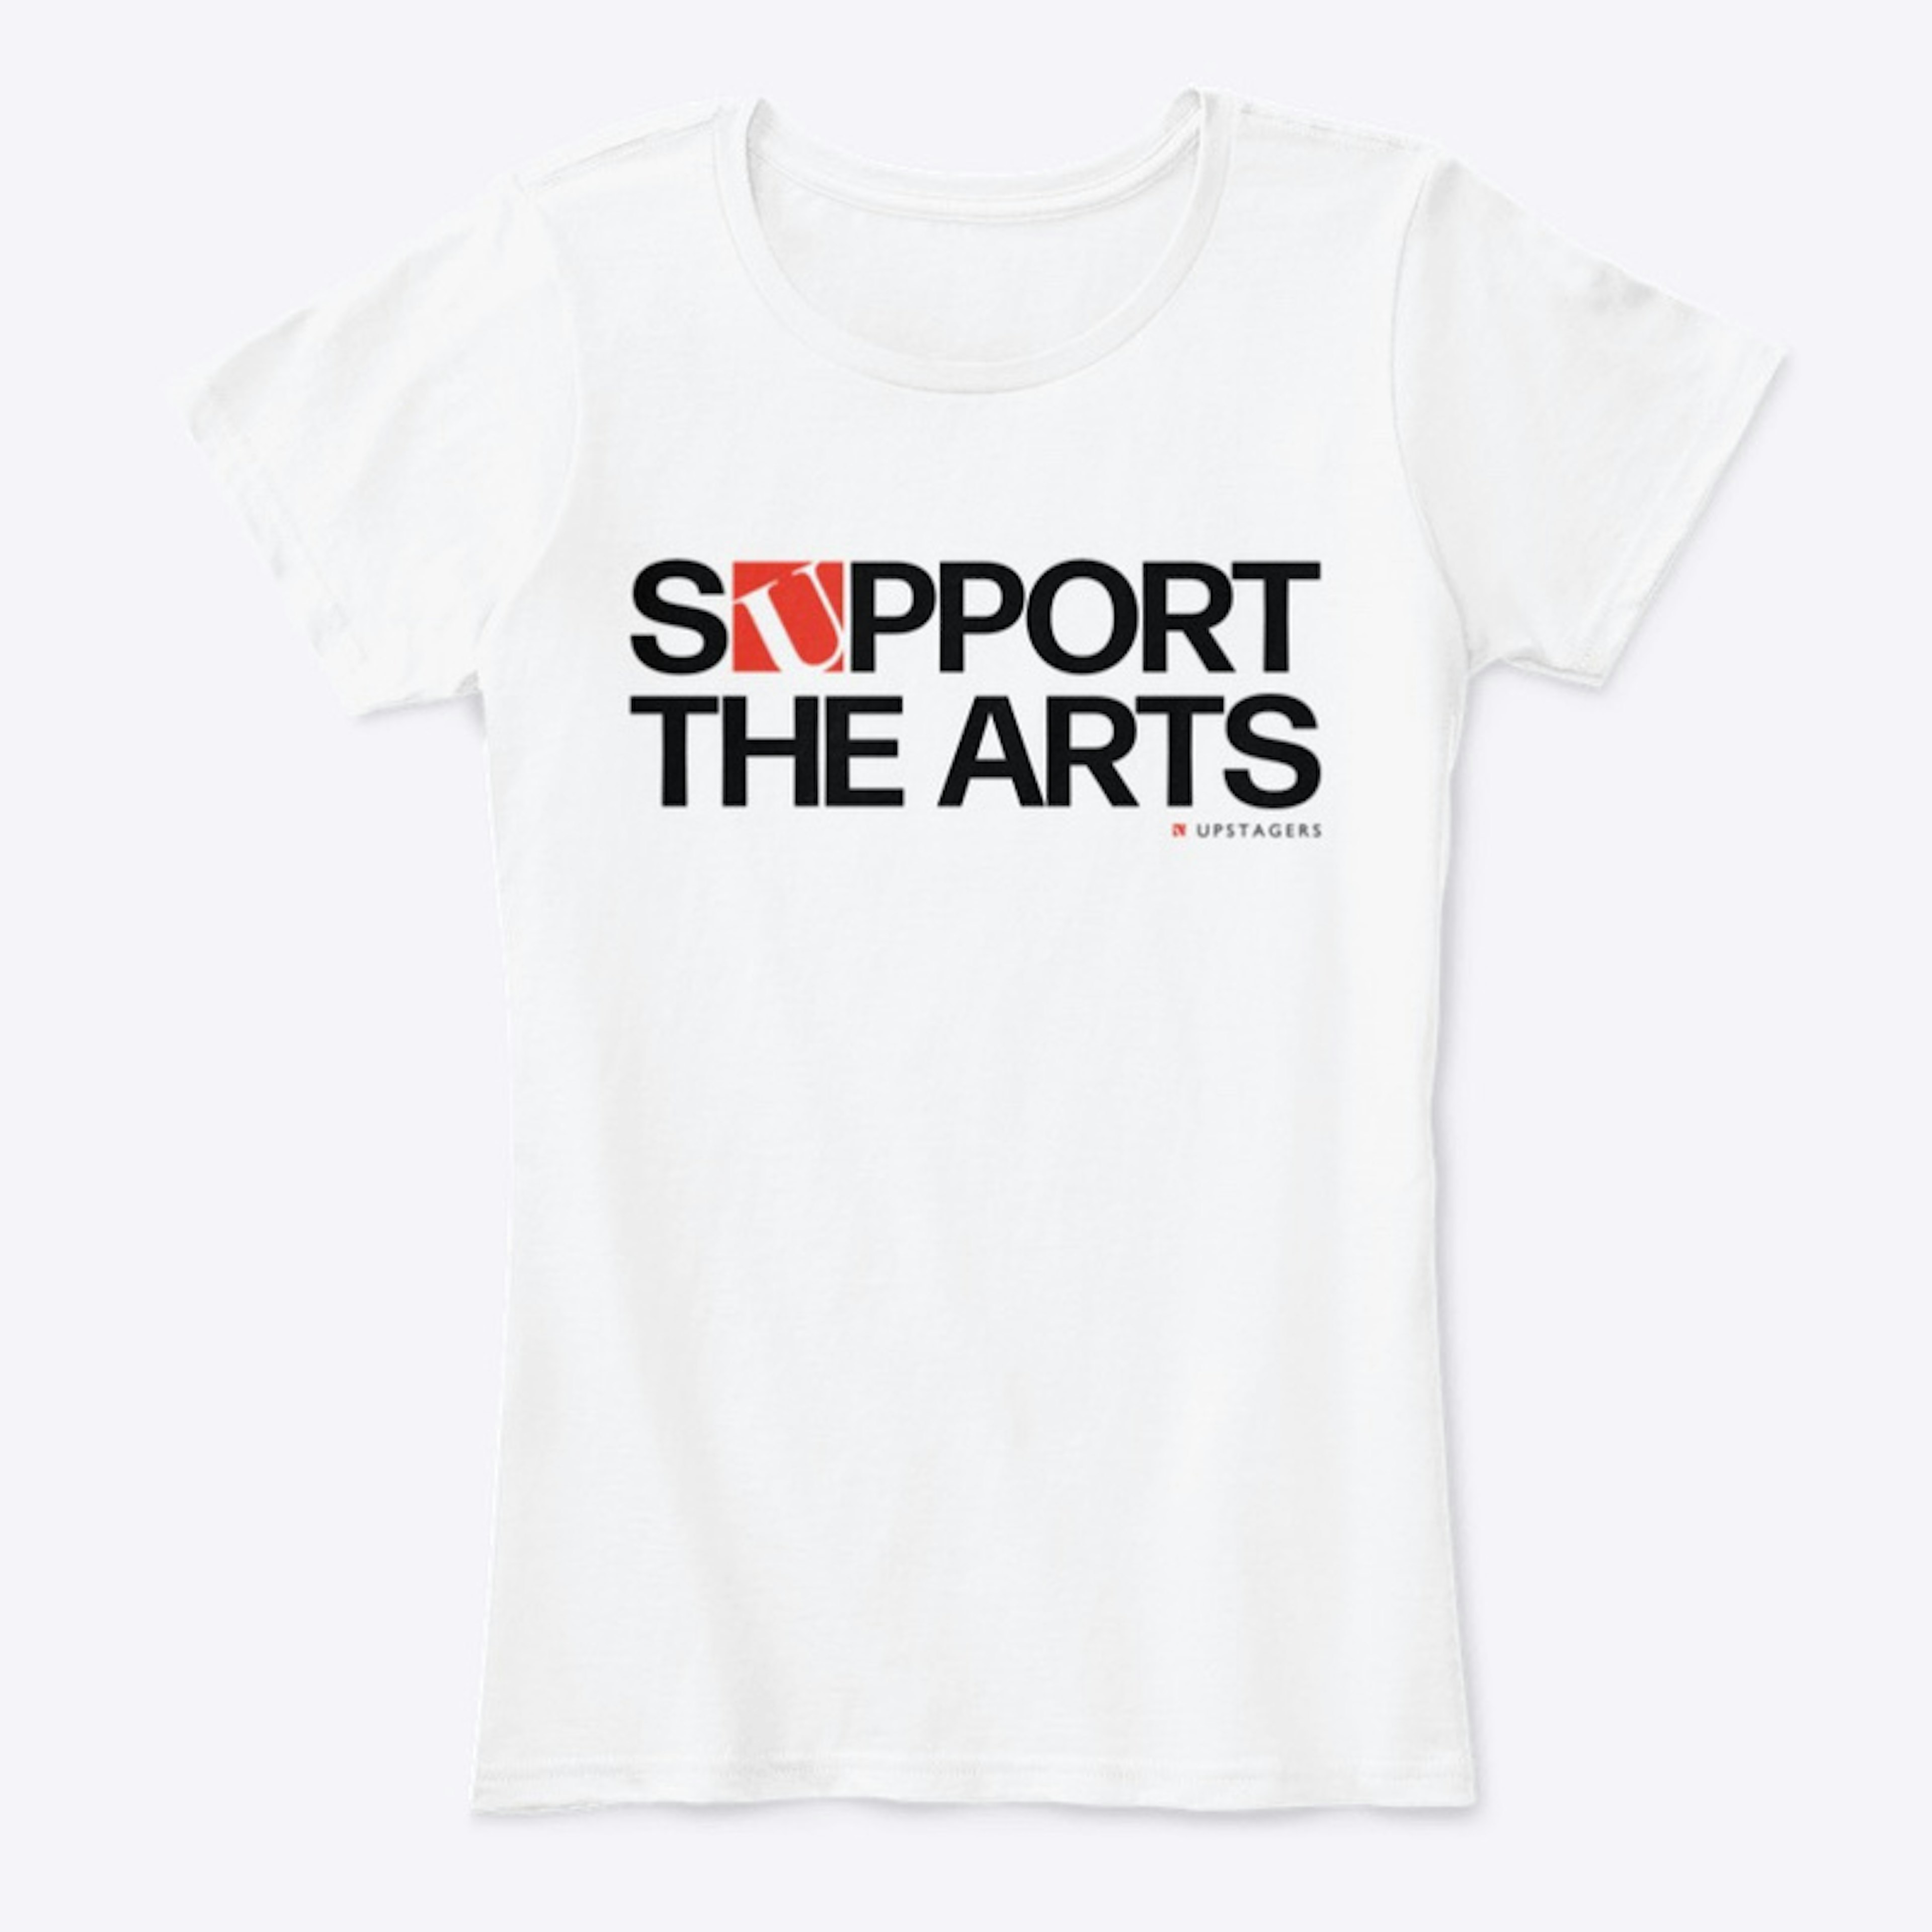 Support the Arts